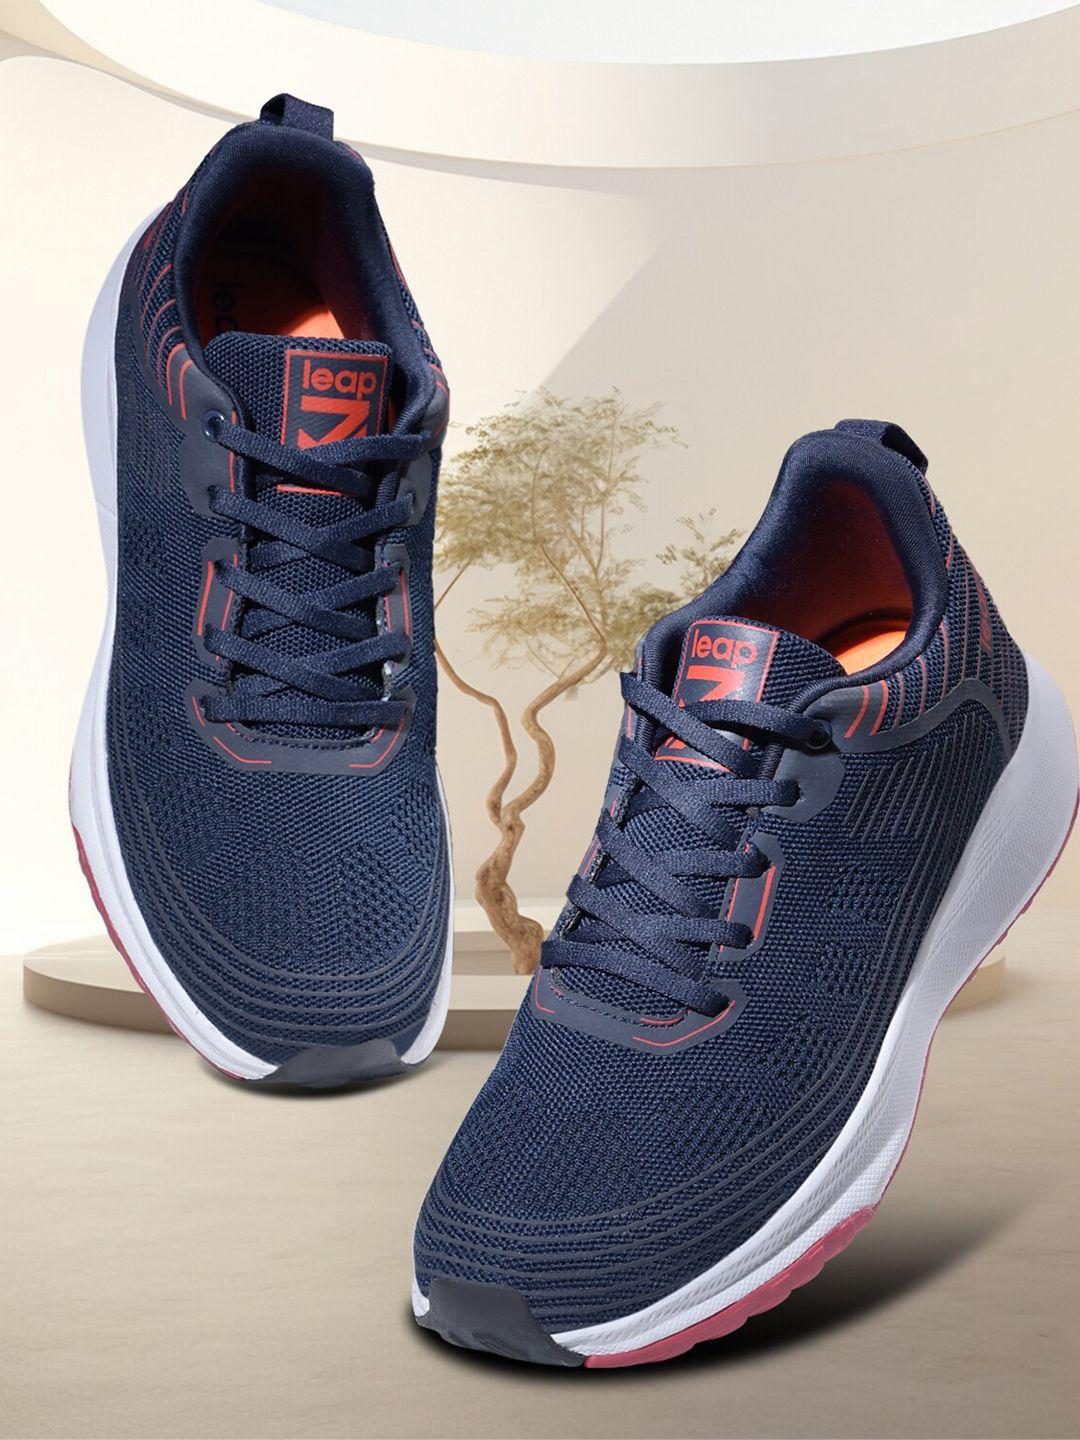 liberty-men-textured-lace-up-running-shoes